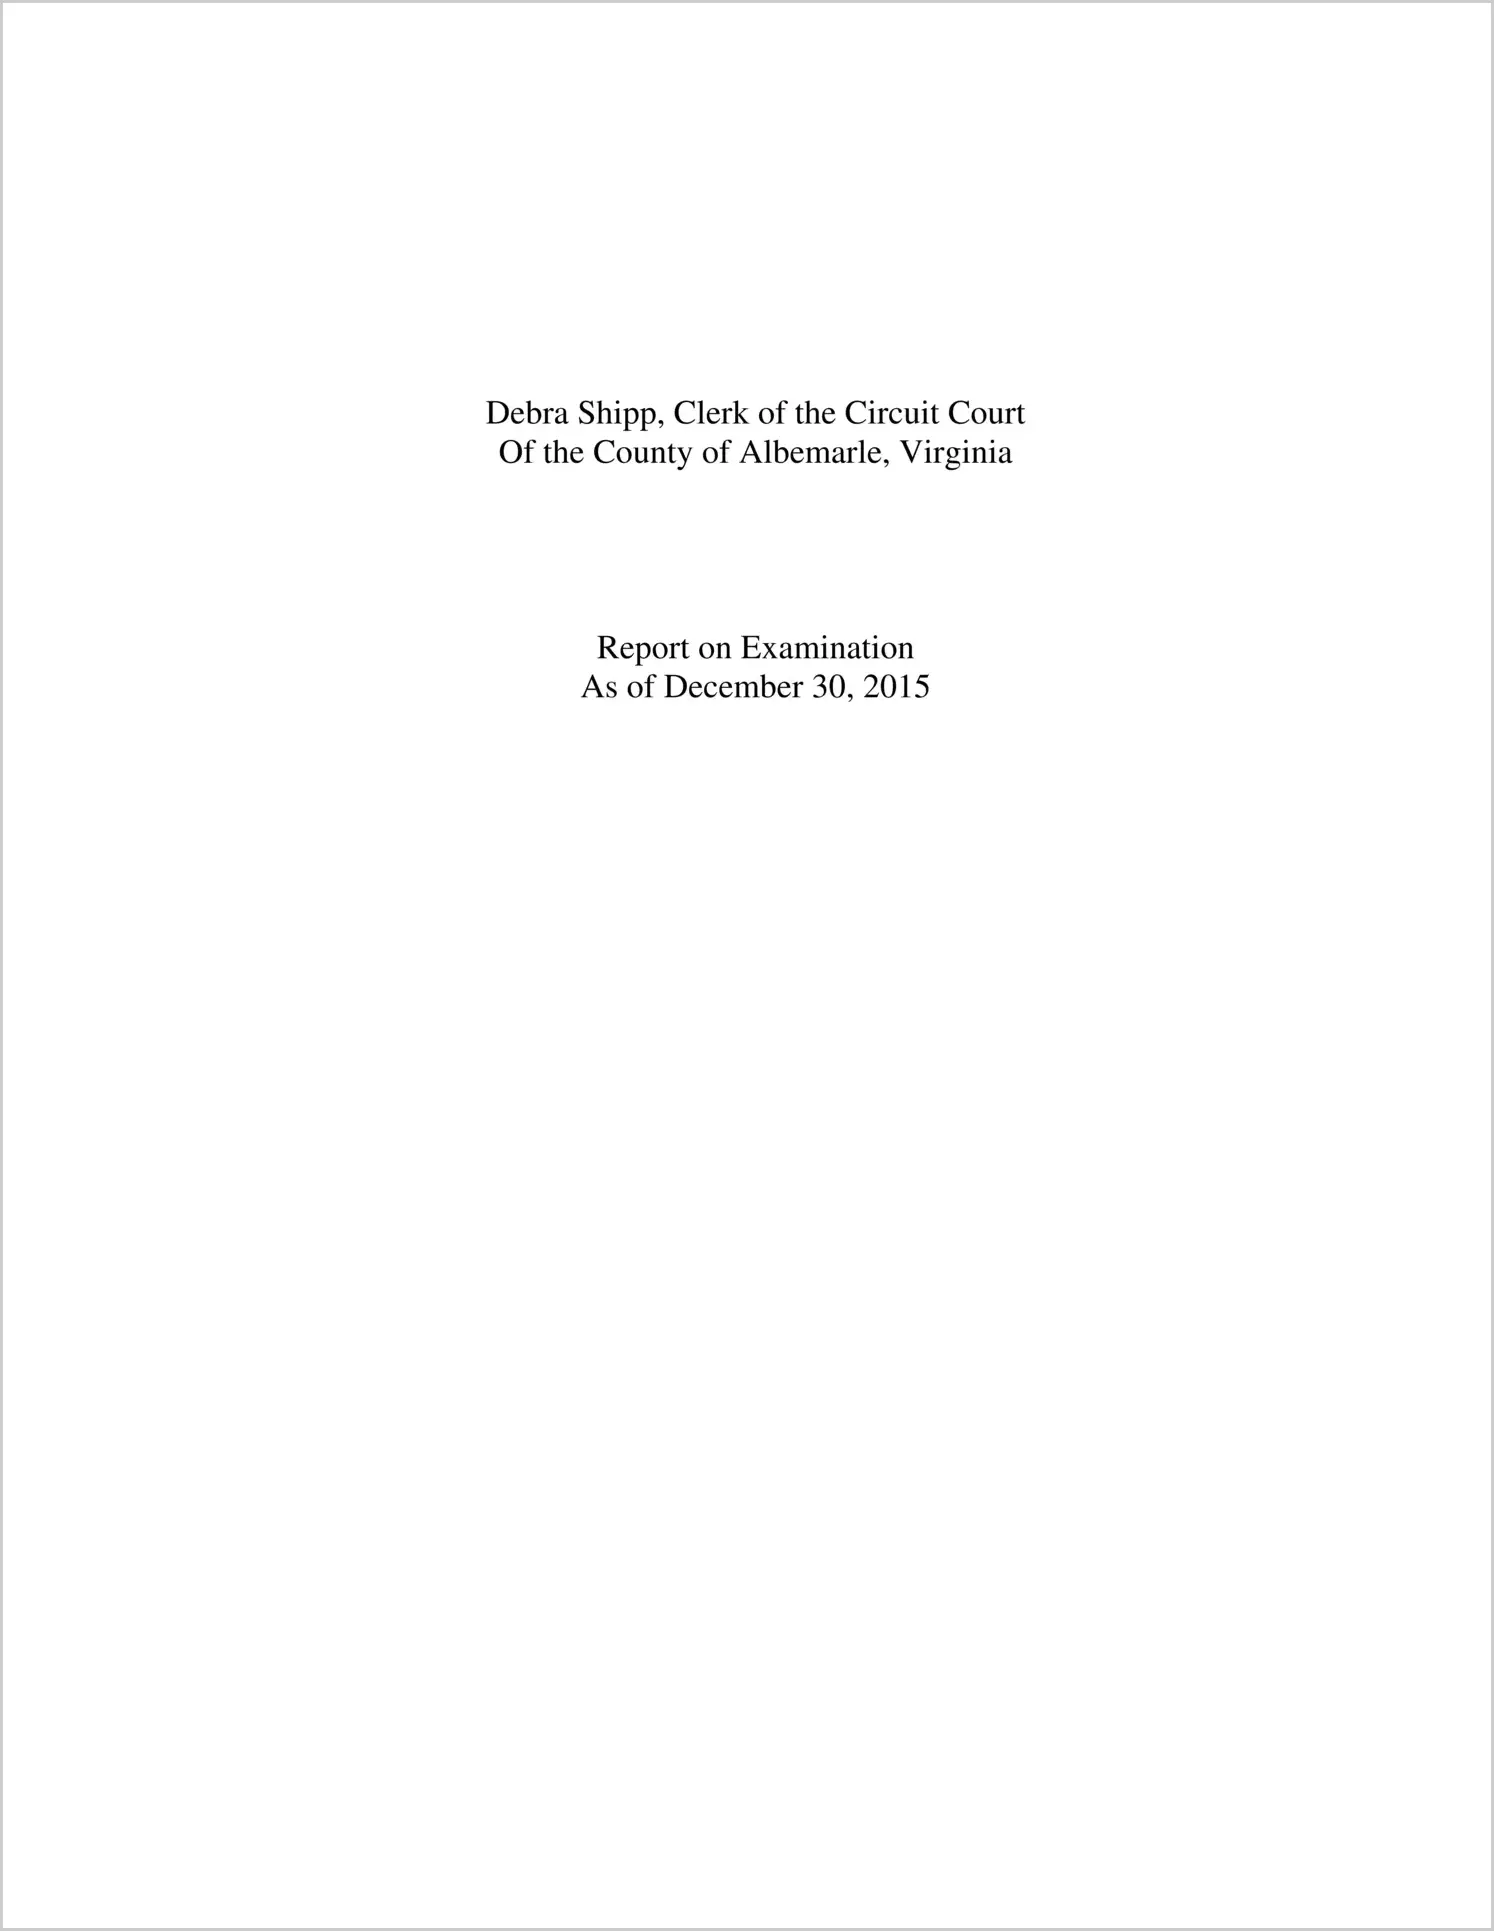 Clerk of the Circuit Court for the County of Albemarle Report on Turnover as of December 30, 2015